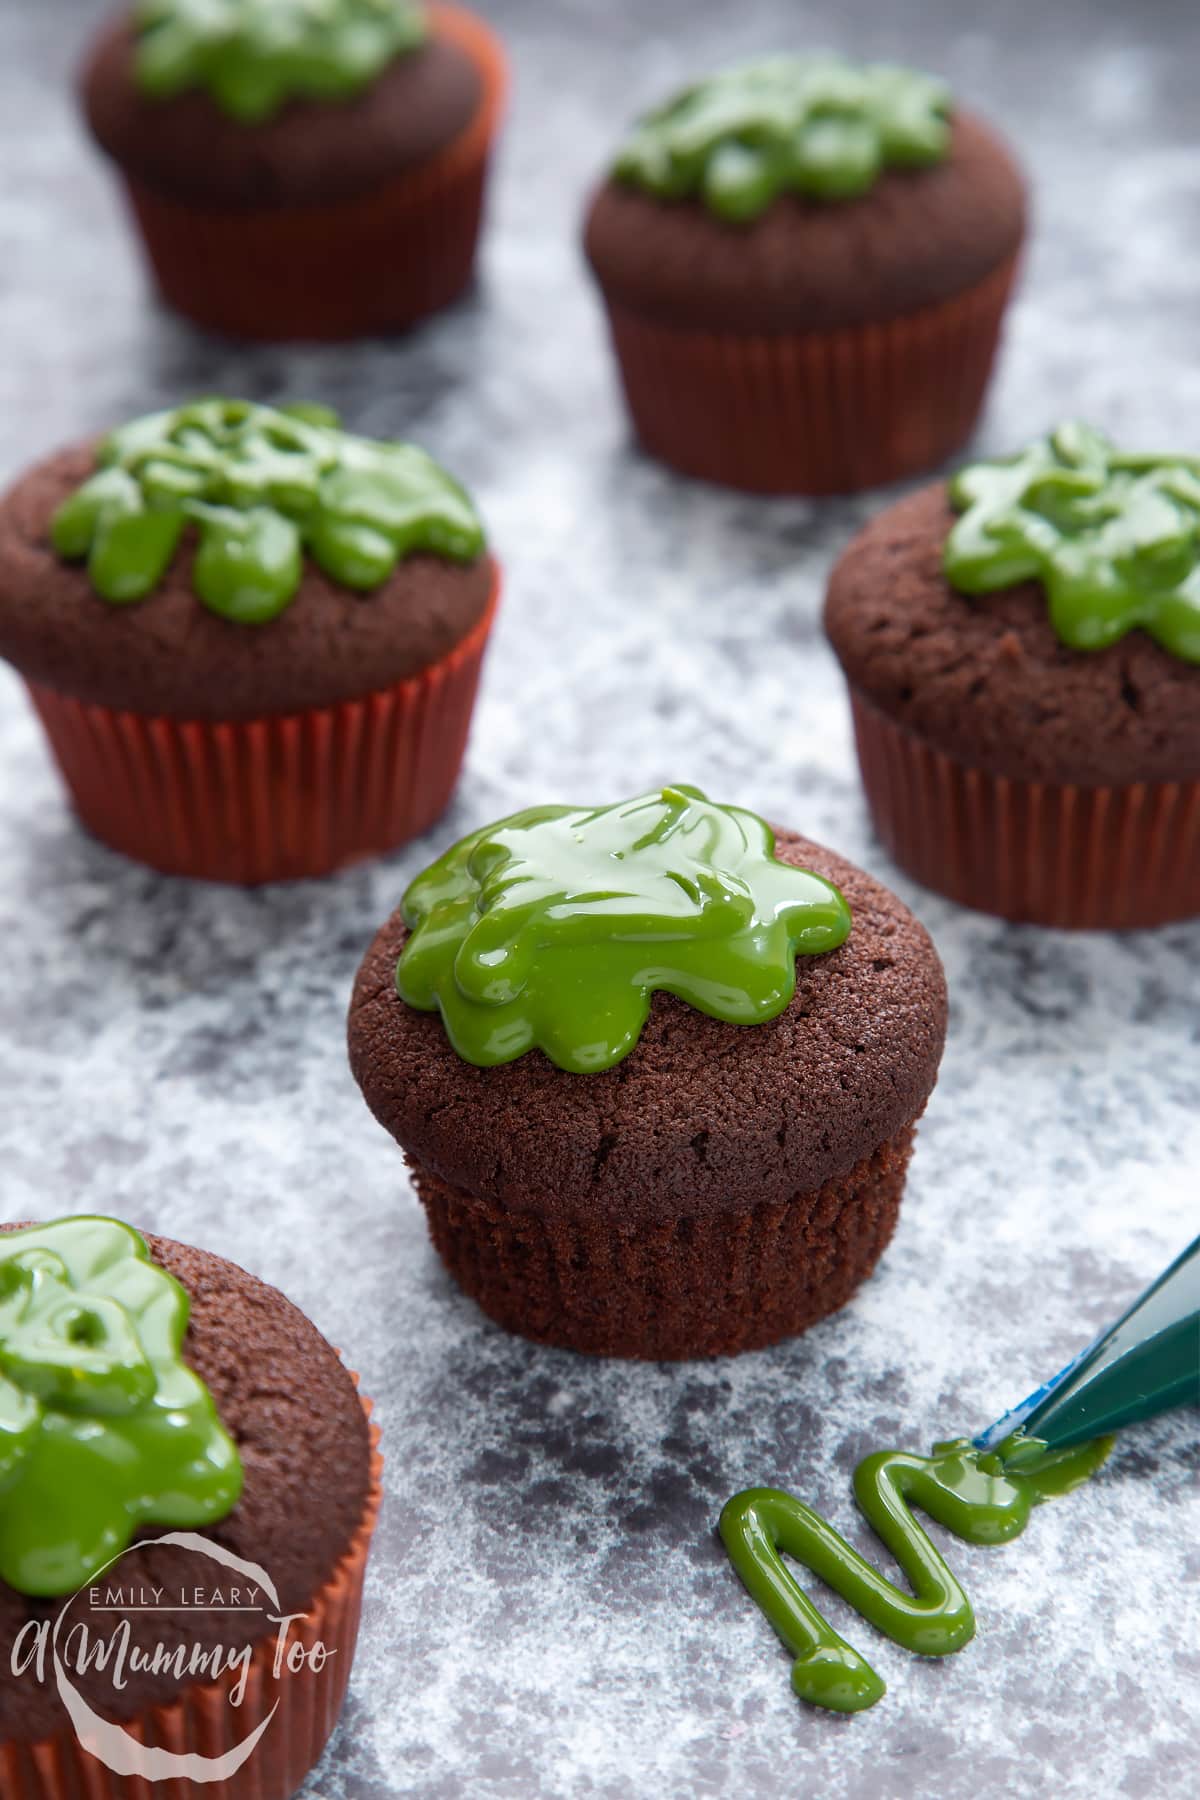 Slime cupcakes on a black backdrop. The cakes have a chocolate sponge topped with dyed-green caramel. The case has been removed from the cupcake in the foreground.